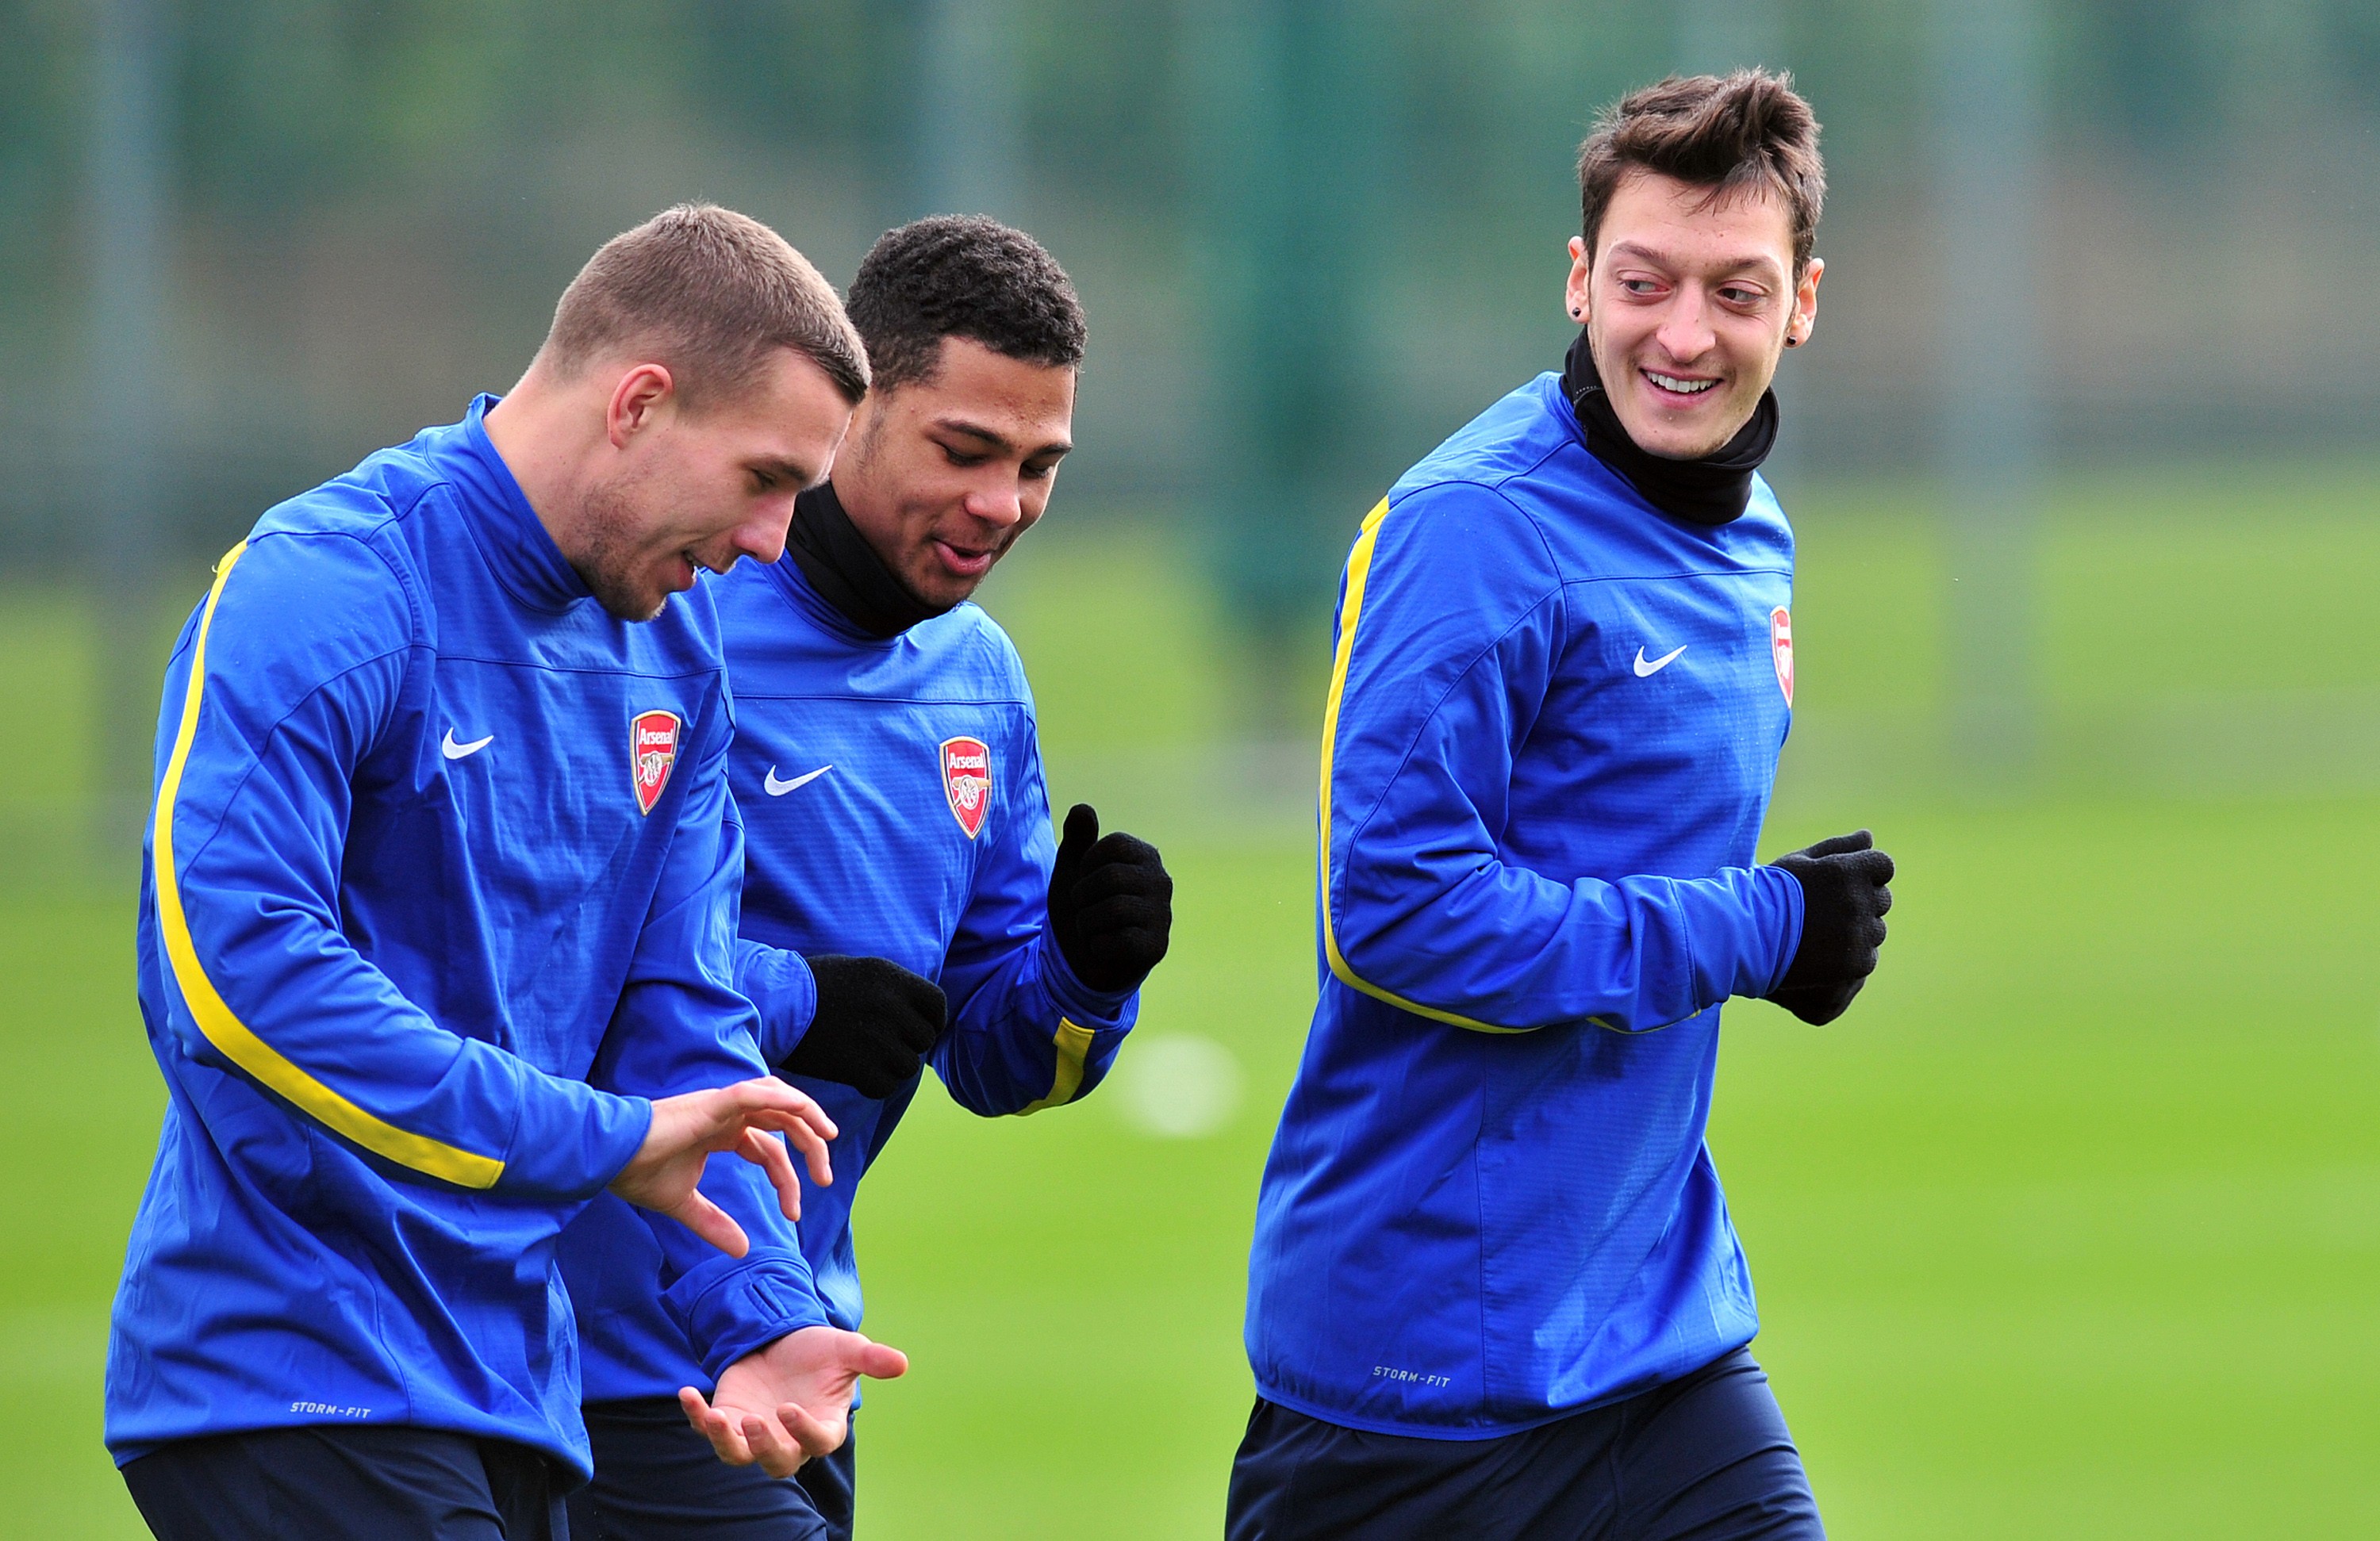 Arsenal's German midfielder Mesut Ozil (R), Arsenal's Polish-born German striker Lukas Podolski (L) and Arsenal's German midfielder Serge Gnabry (2nd L) during a training session at Arsenal's training ground at London Colney, north of London on February 18, 2014, one day ahead of their Champions League last 16, first leg match against Bayern Munich. AFP PHOTO / GLYN KIRK / Getty Images